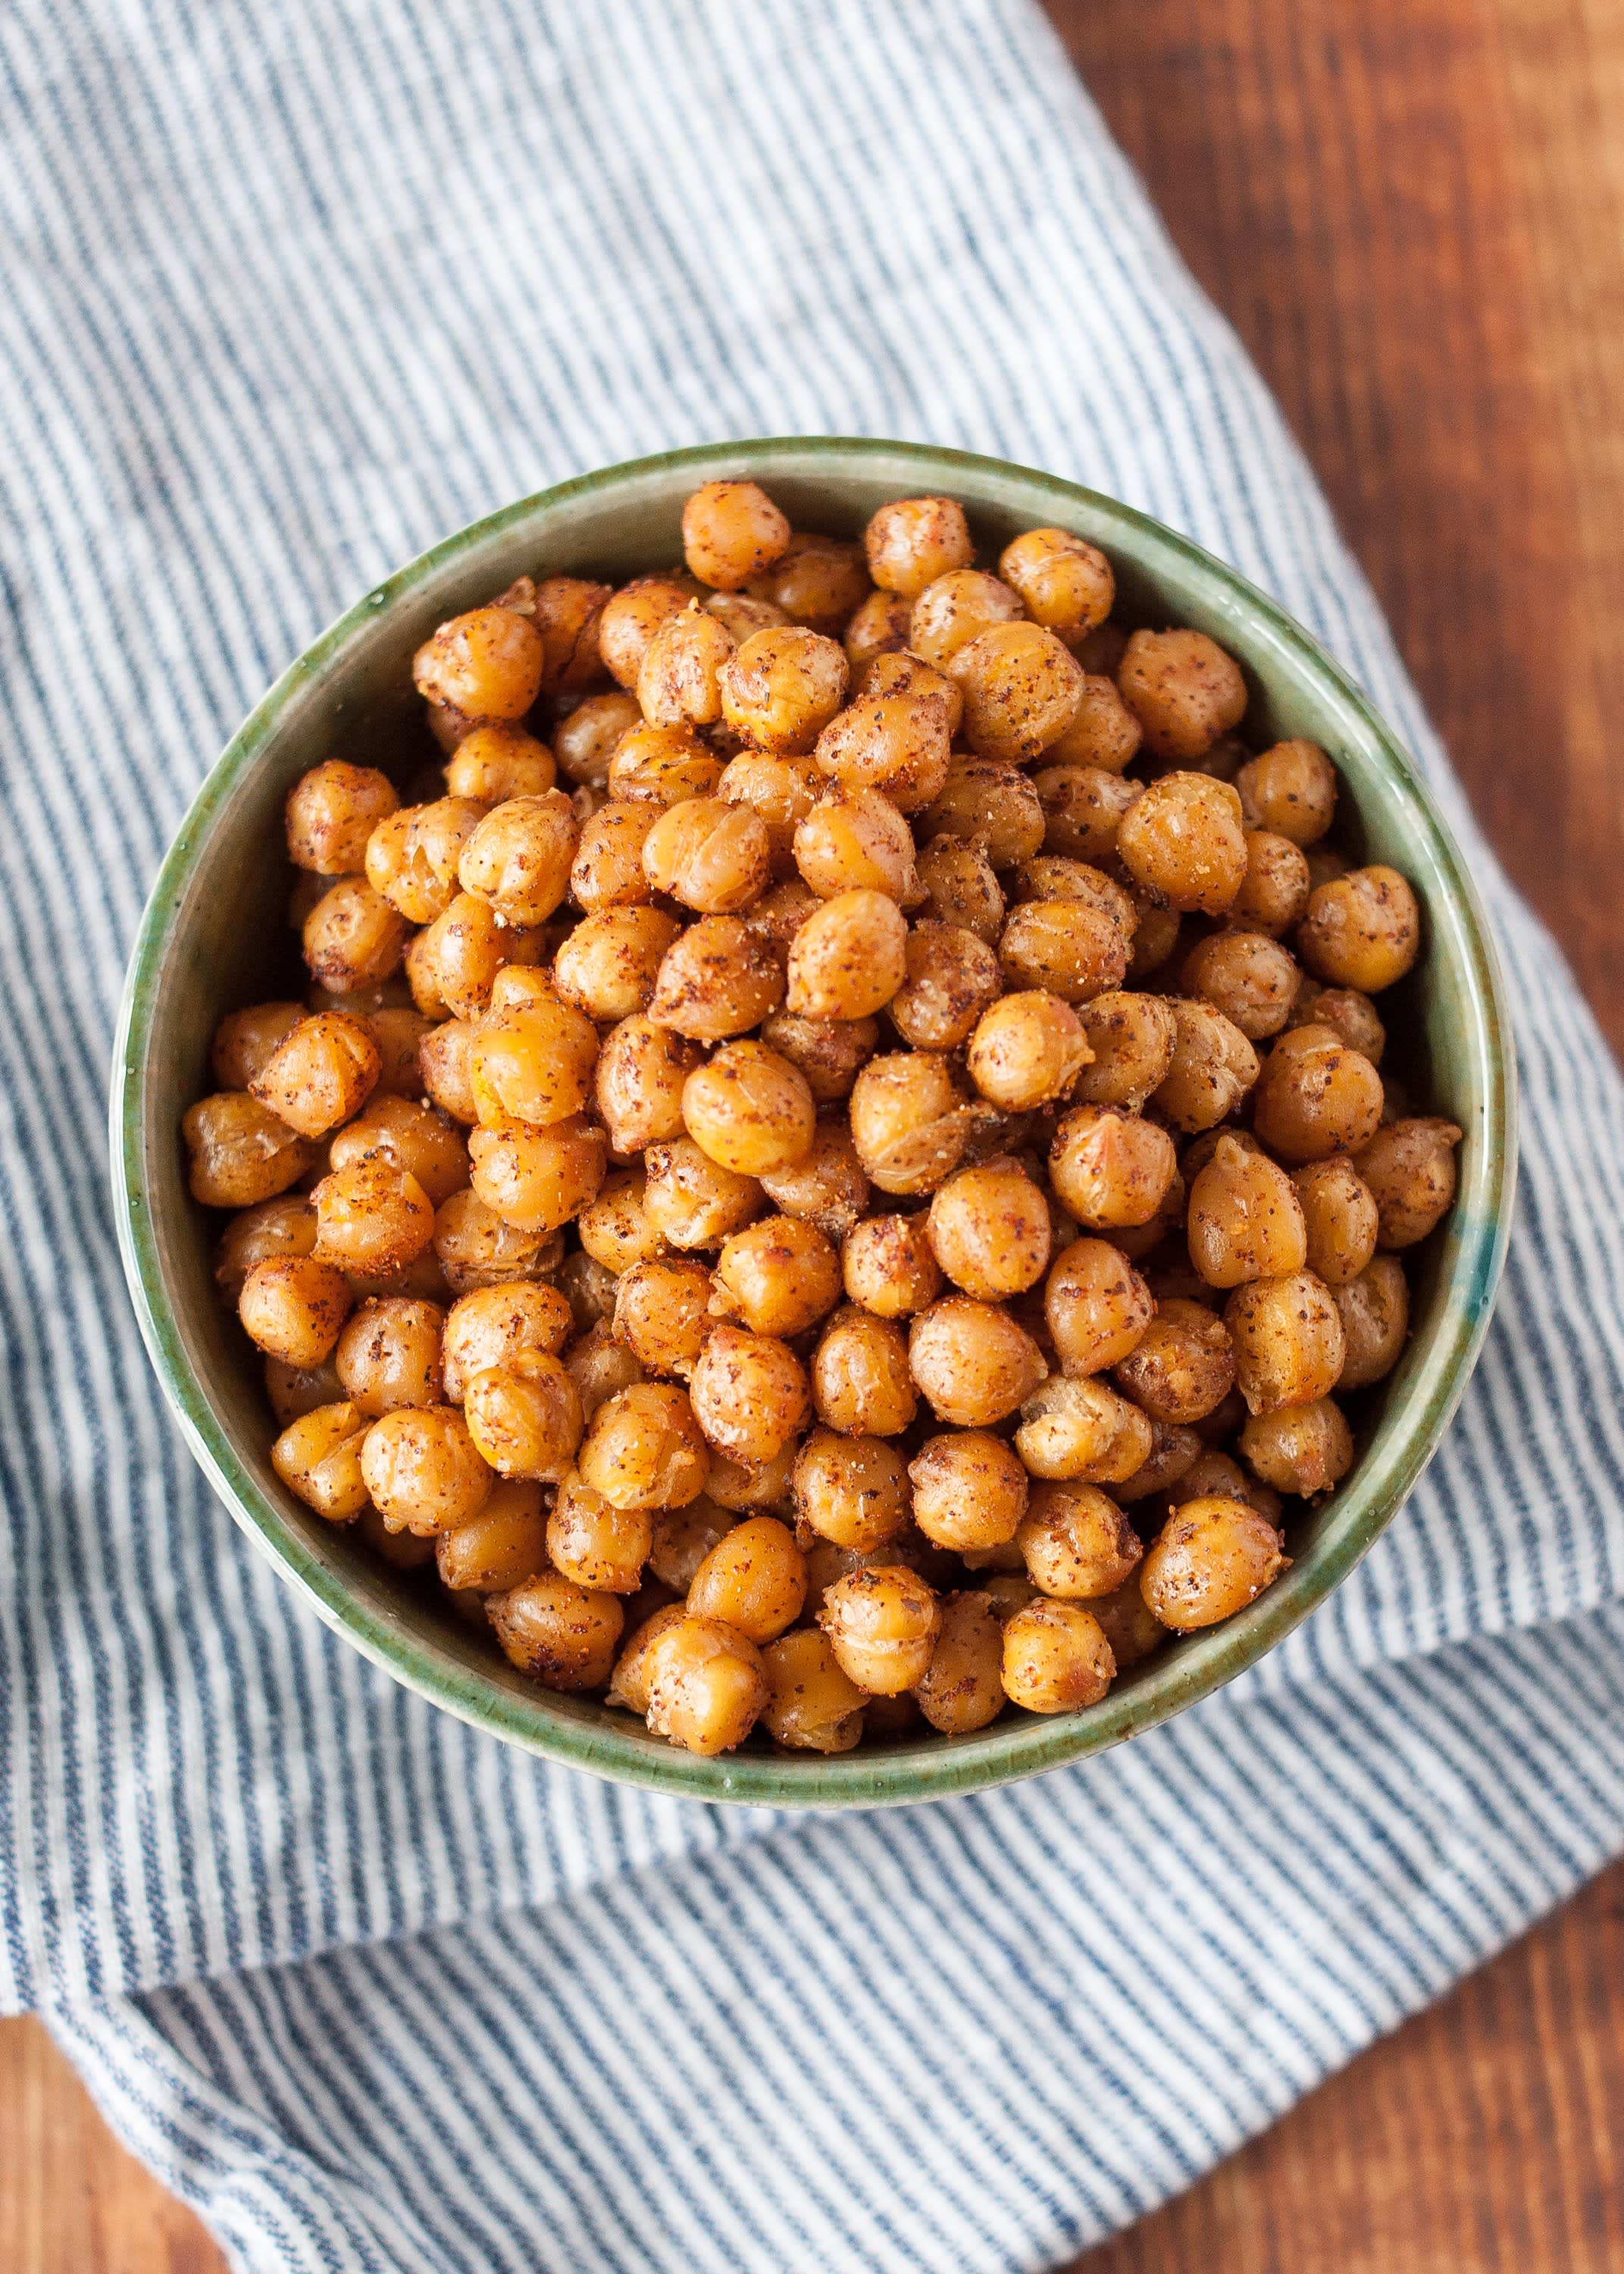 How To Make Crispy Roasted Chickpeas In The Oven Kitchn